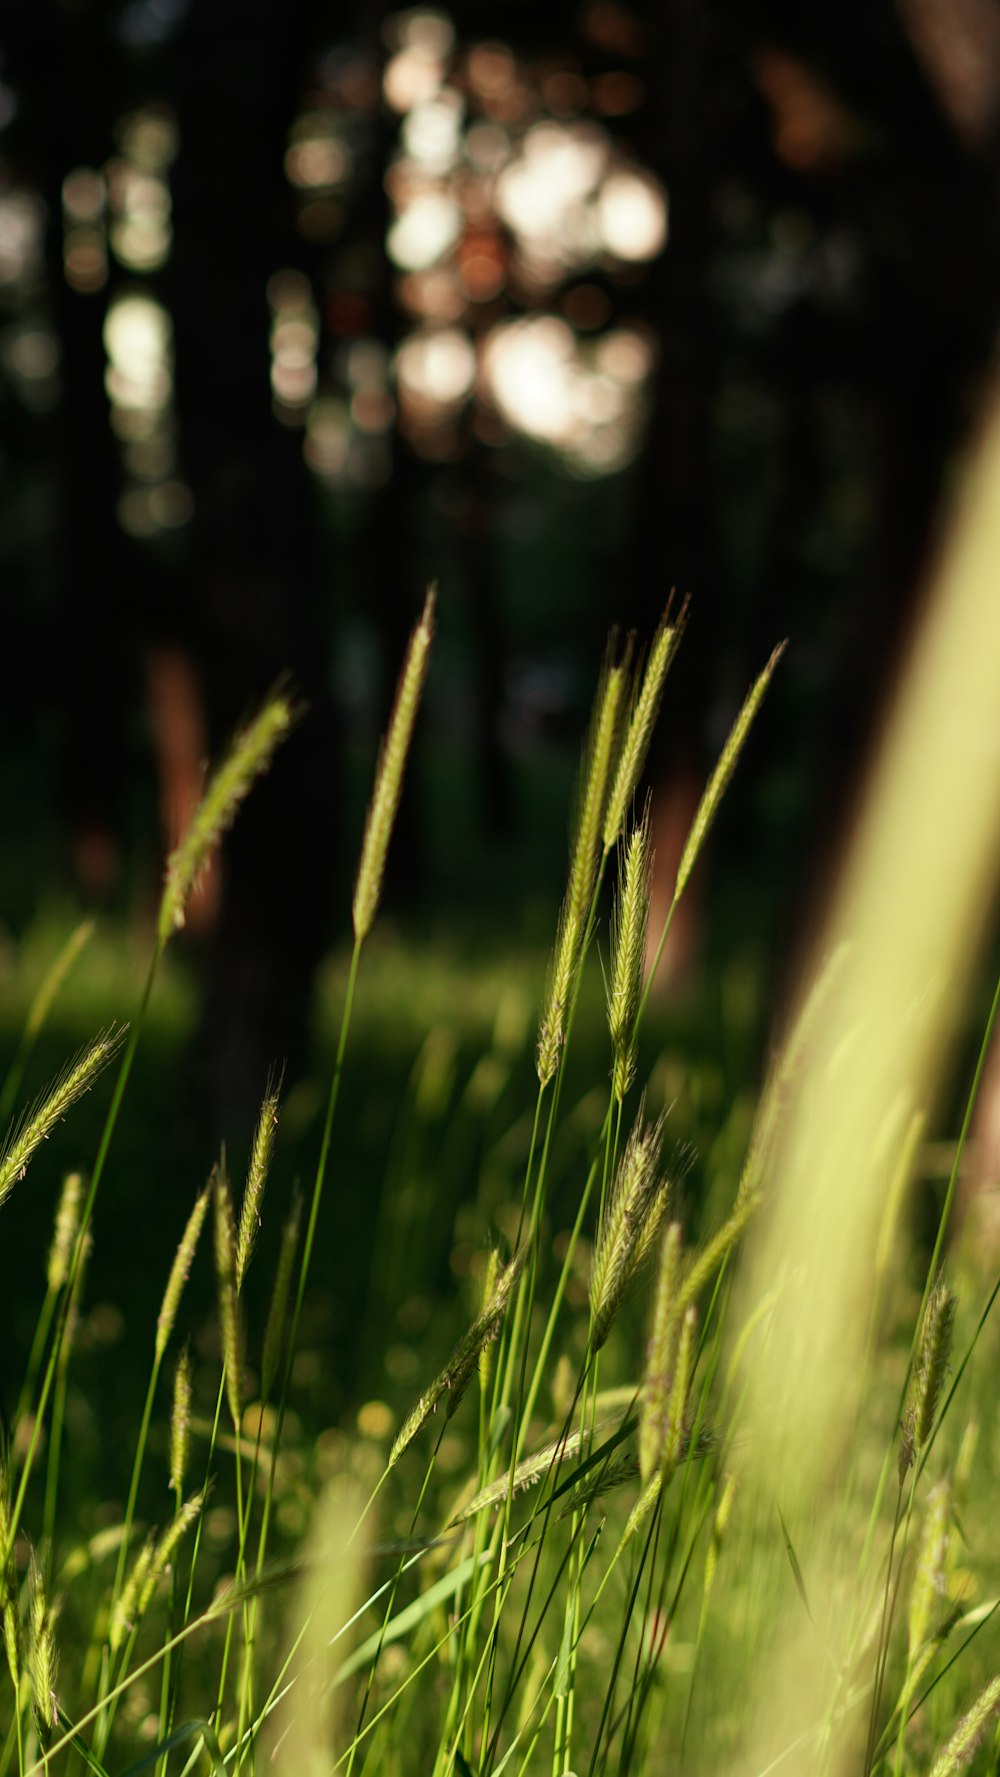 a close up of a grassy field with trees in the background